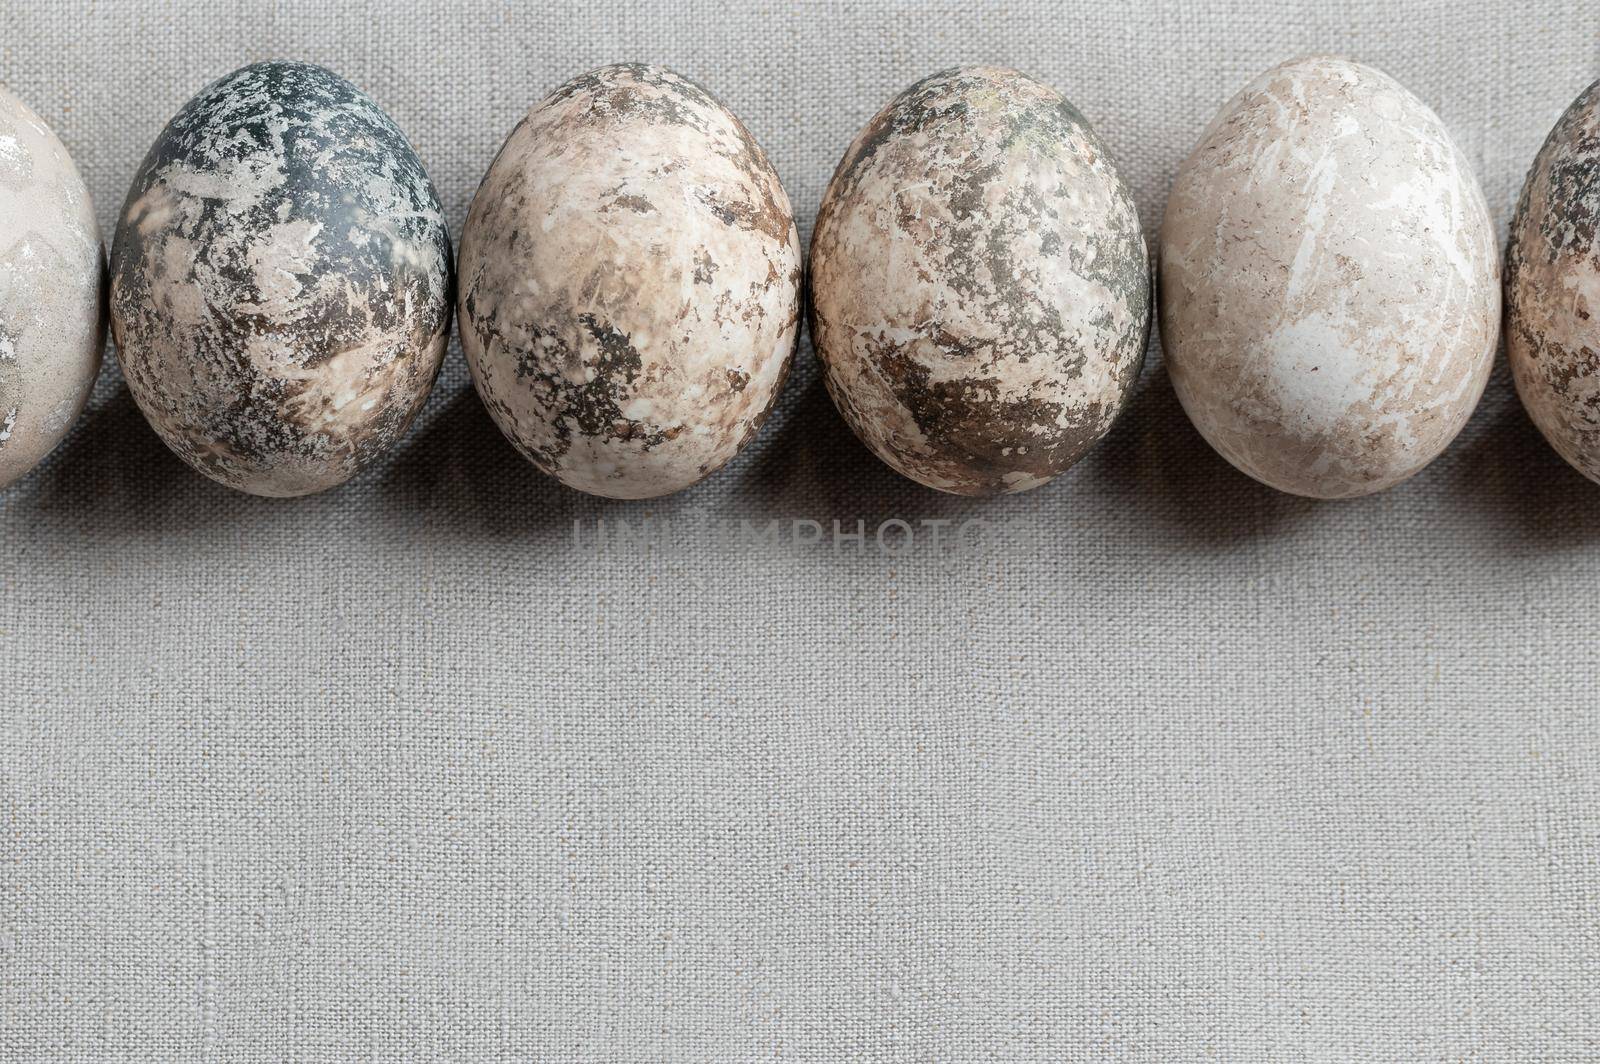 Easter composition - several painted with natural dyes with marble effect on a linen tablecloth in a row.